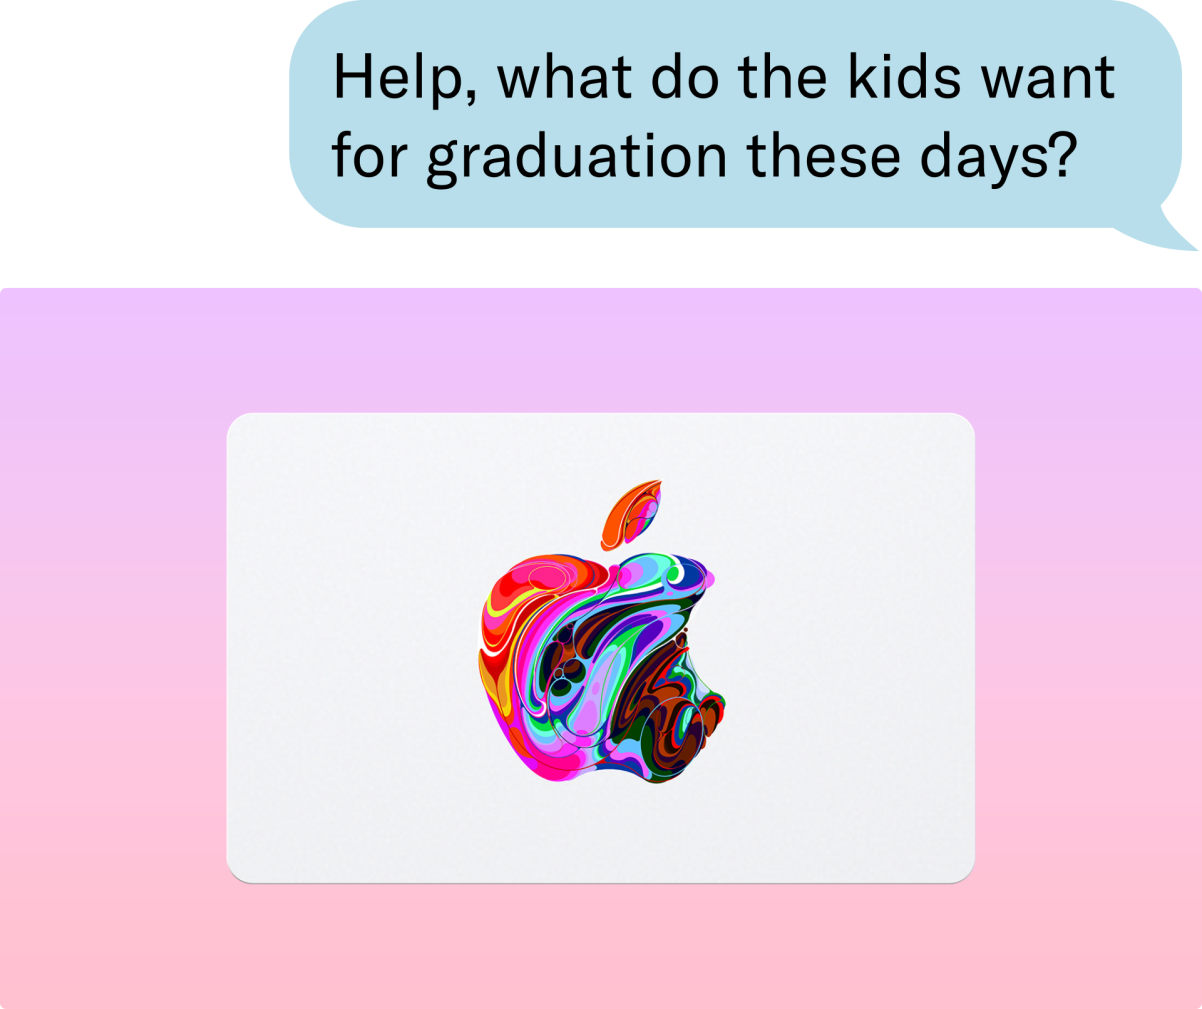 help, what do the kids want for graduation these days? apple gift card